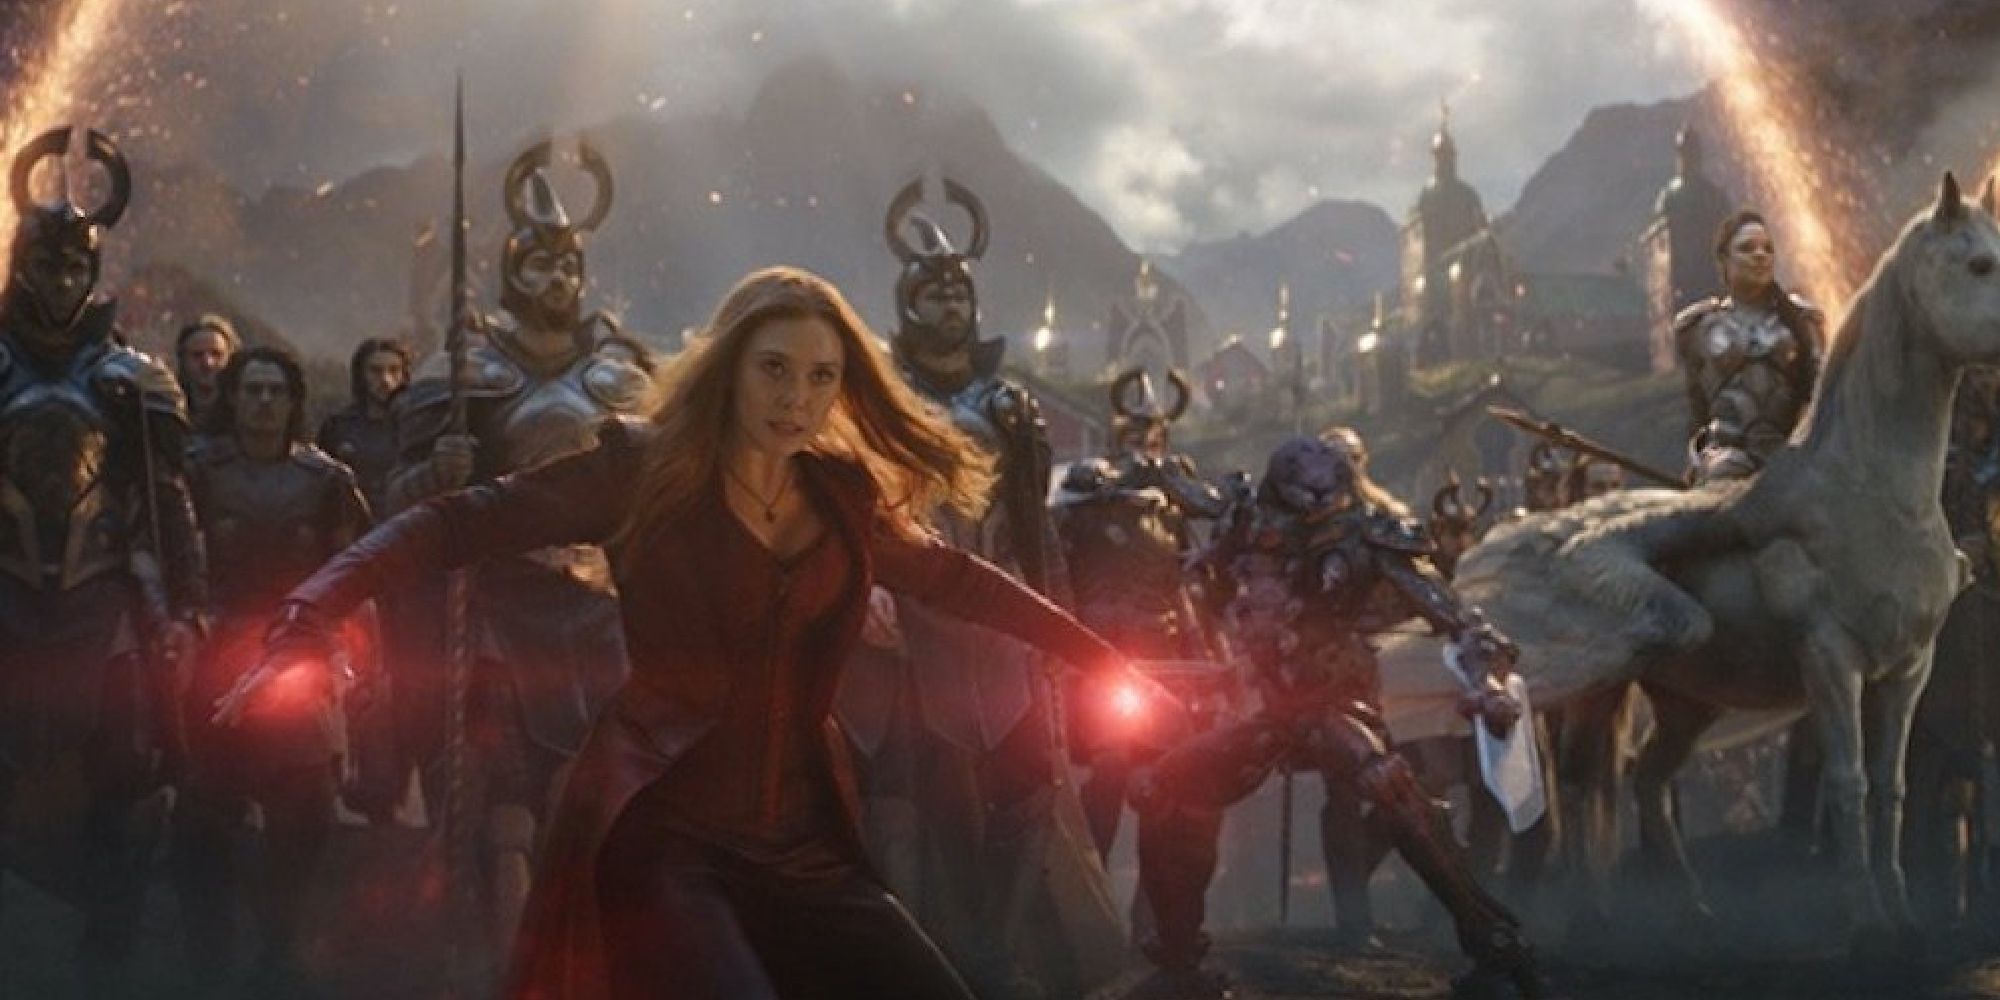 Wanda appearing from one of the portals in front of the Asgardian army in Endgame